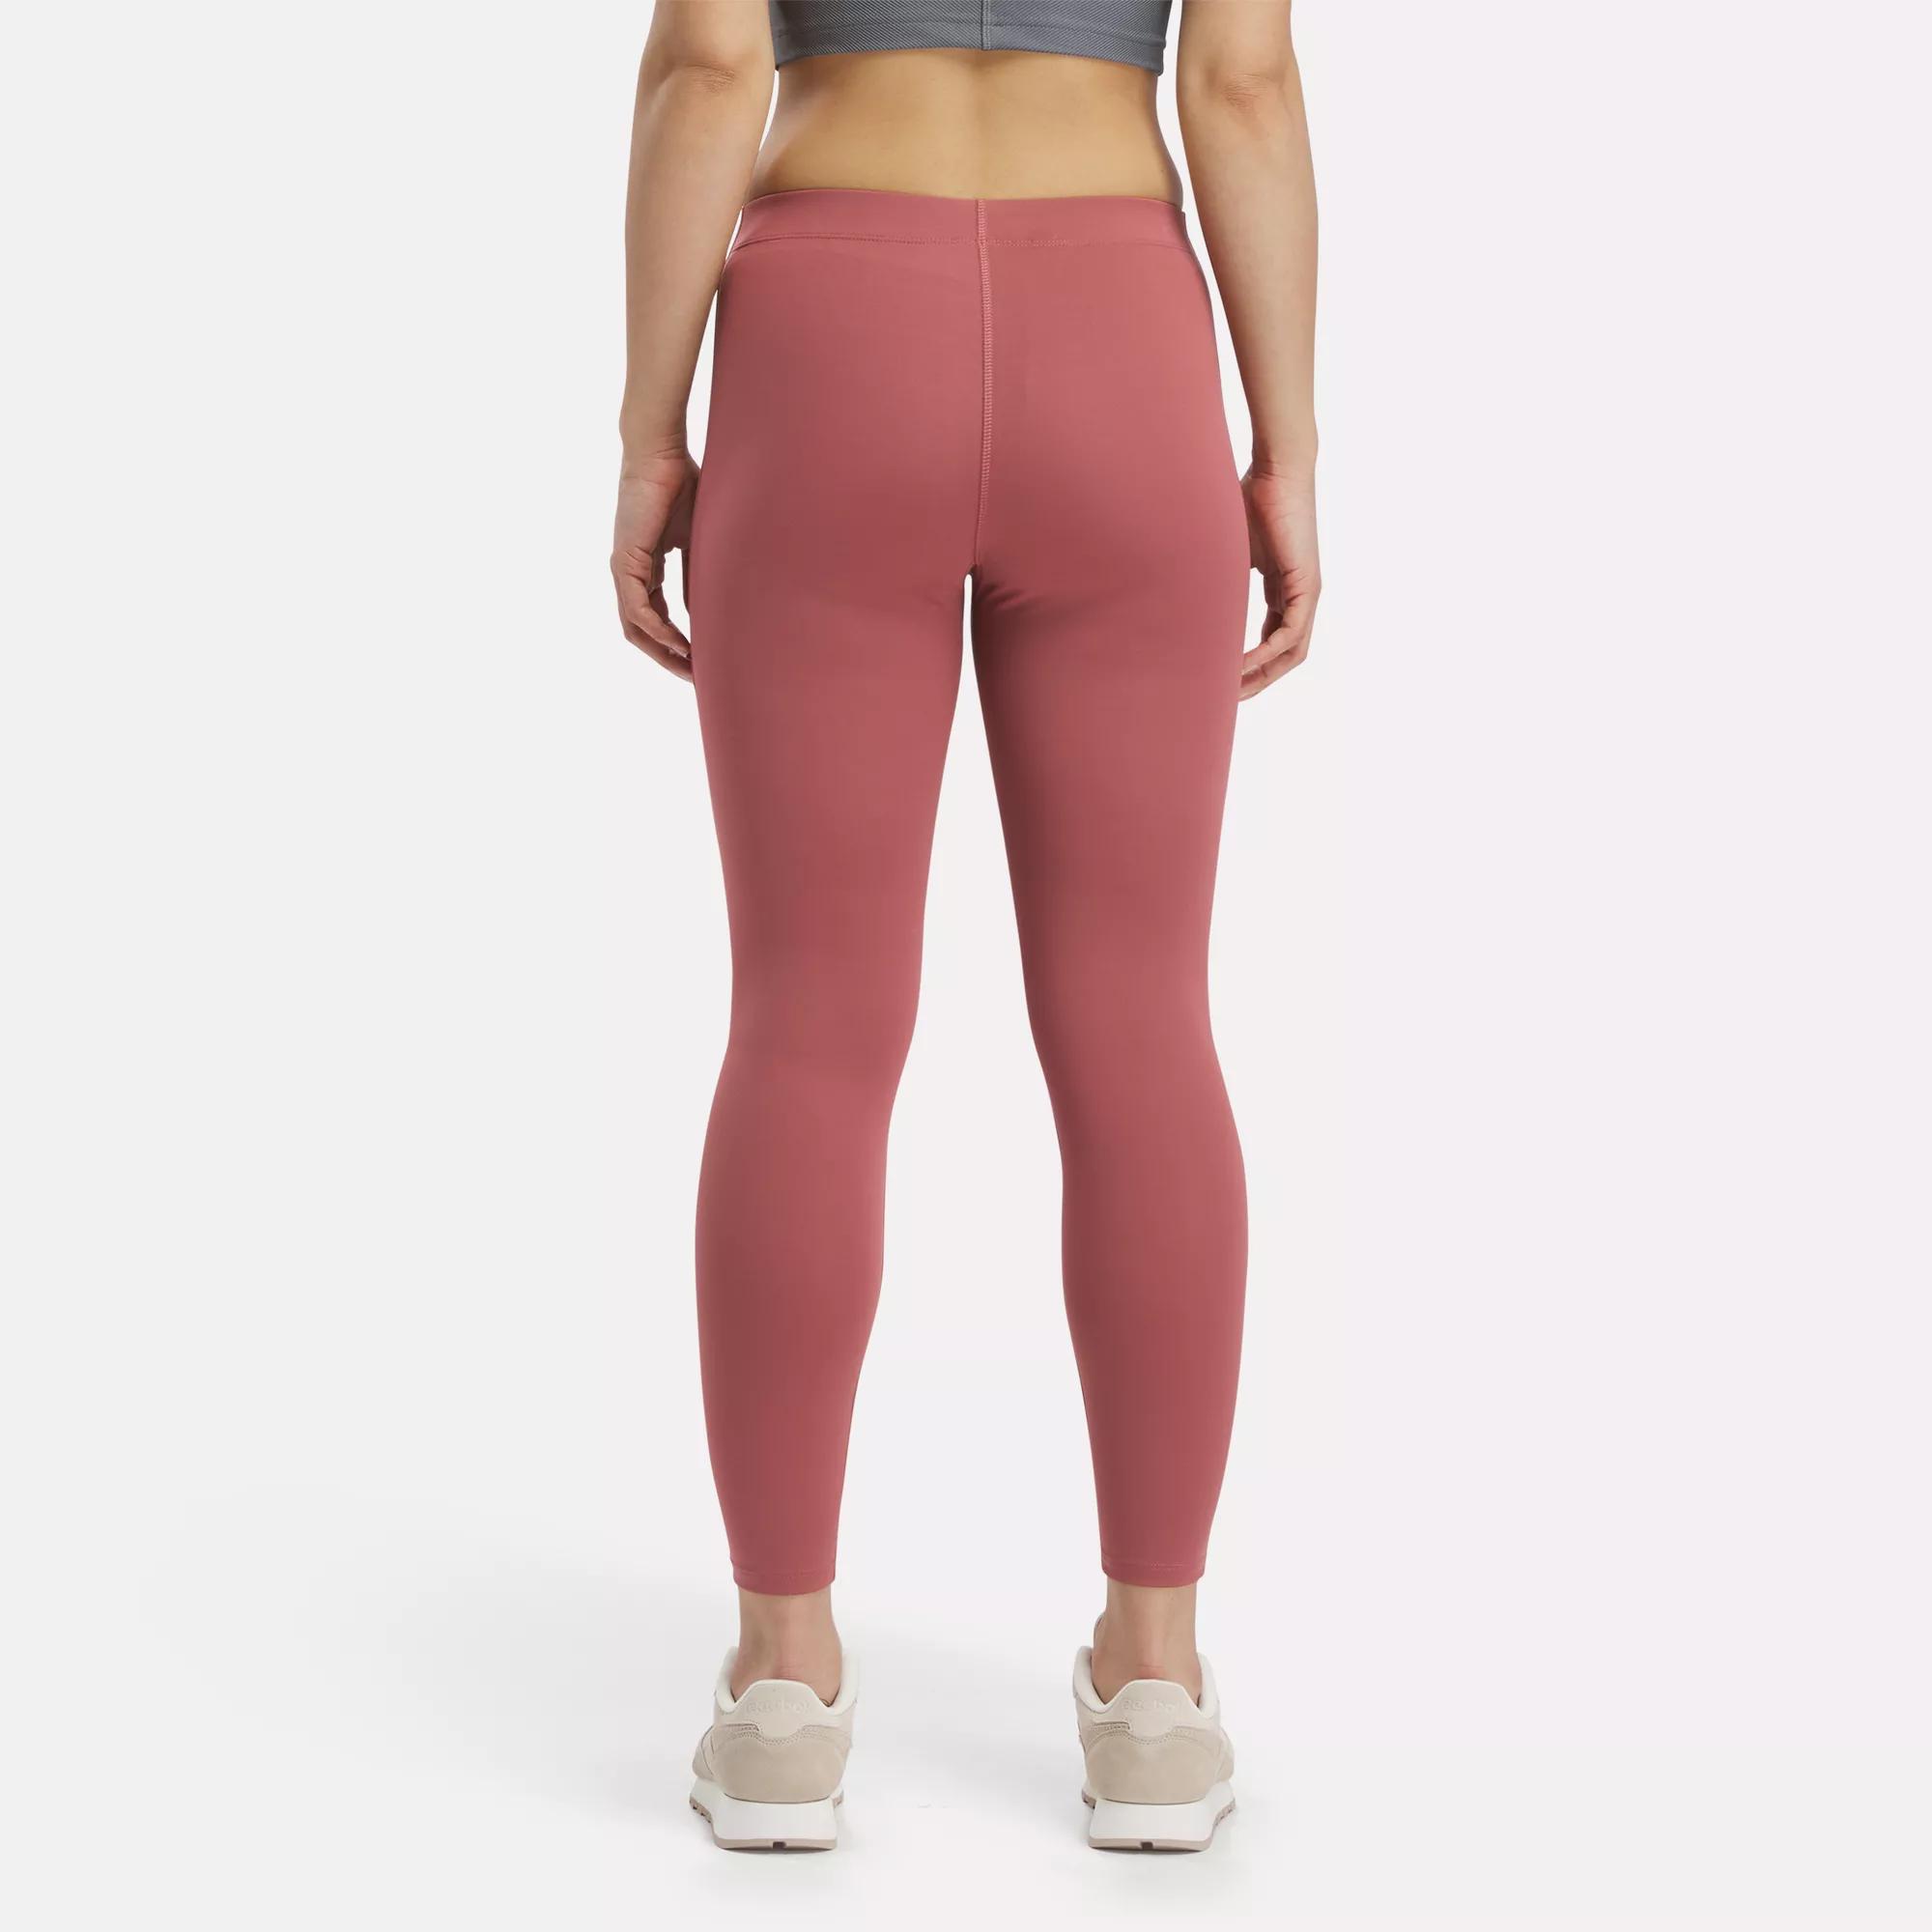 Women's 3 Waistband Solid Peach Skin Leggings. - 3 Elastic Waistband -  Full-Length - Inseam approximately 28 - One size fits most 0-14 - 92%  Polyester / 8% Spandex, 7300949